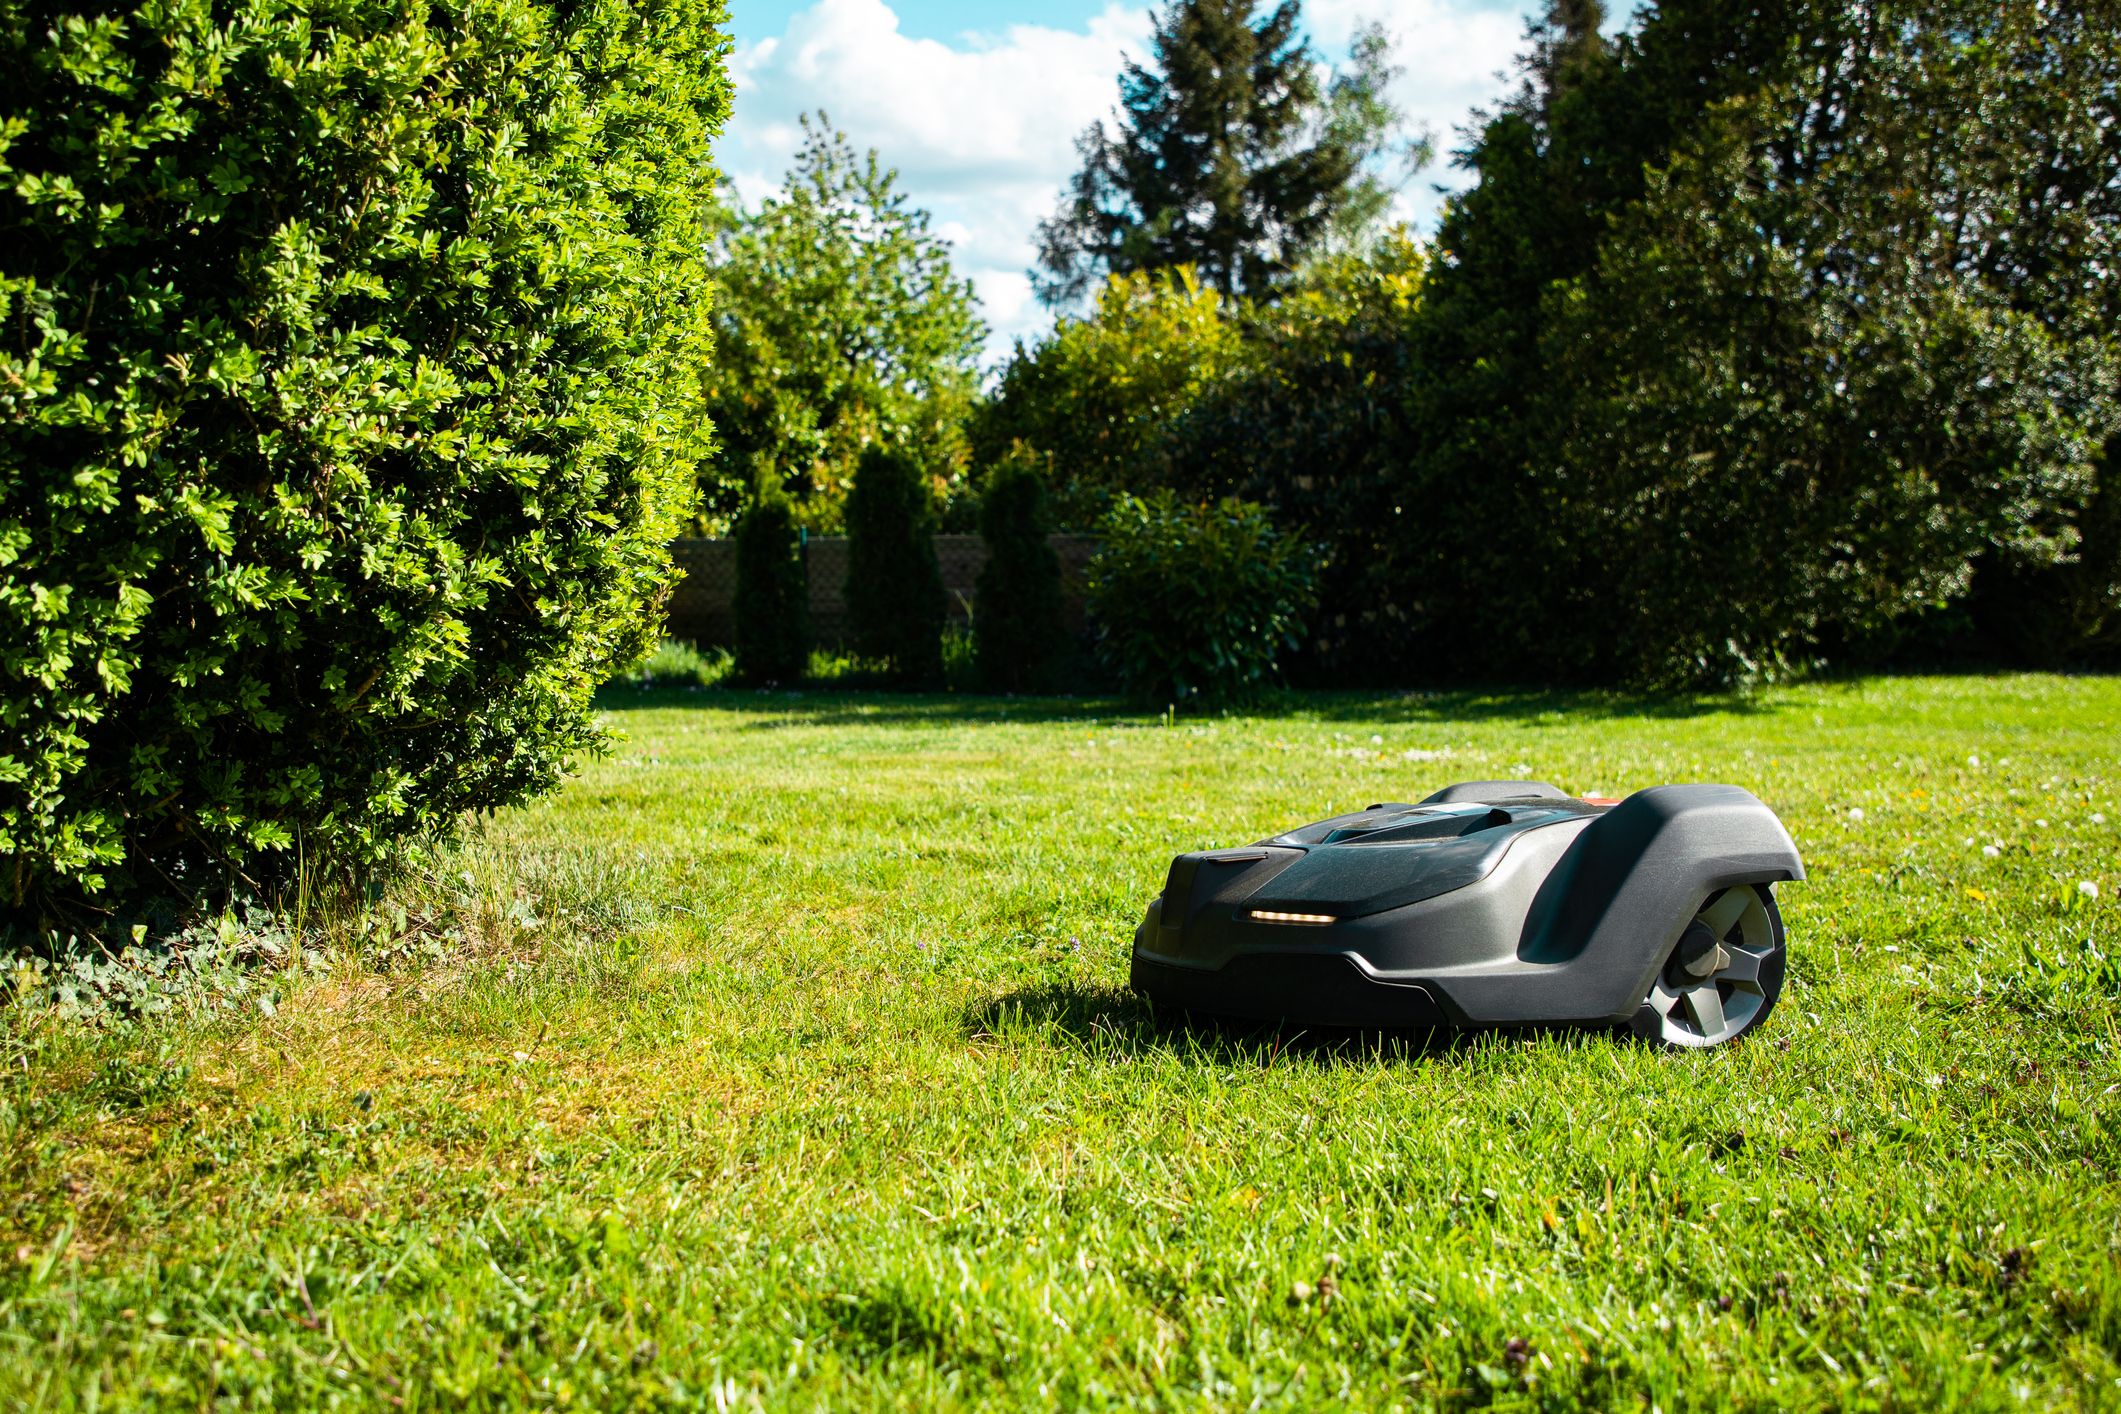 8 Best Robot Lawn Mowers To In